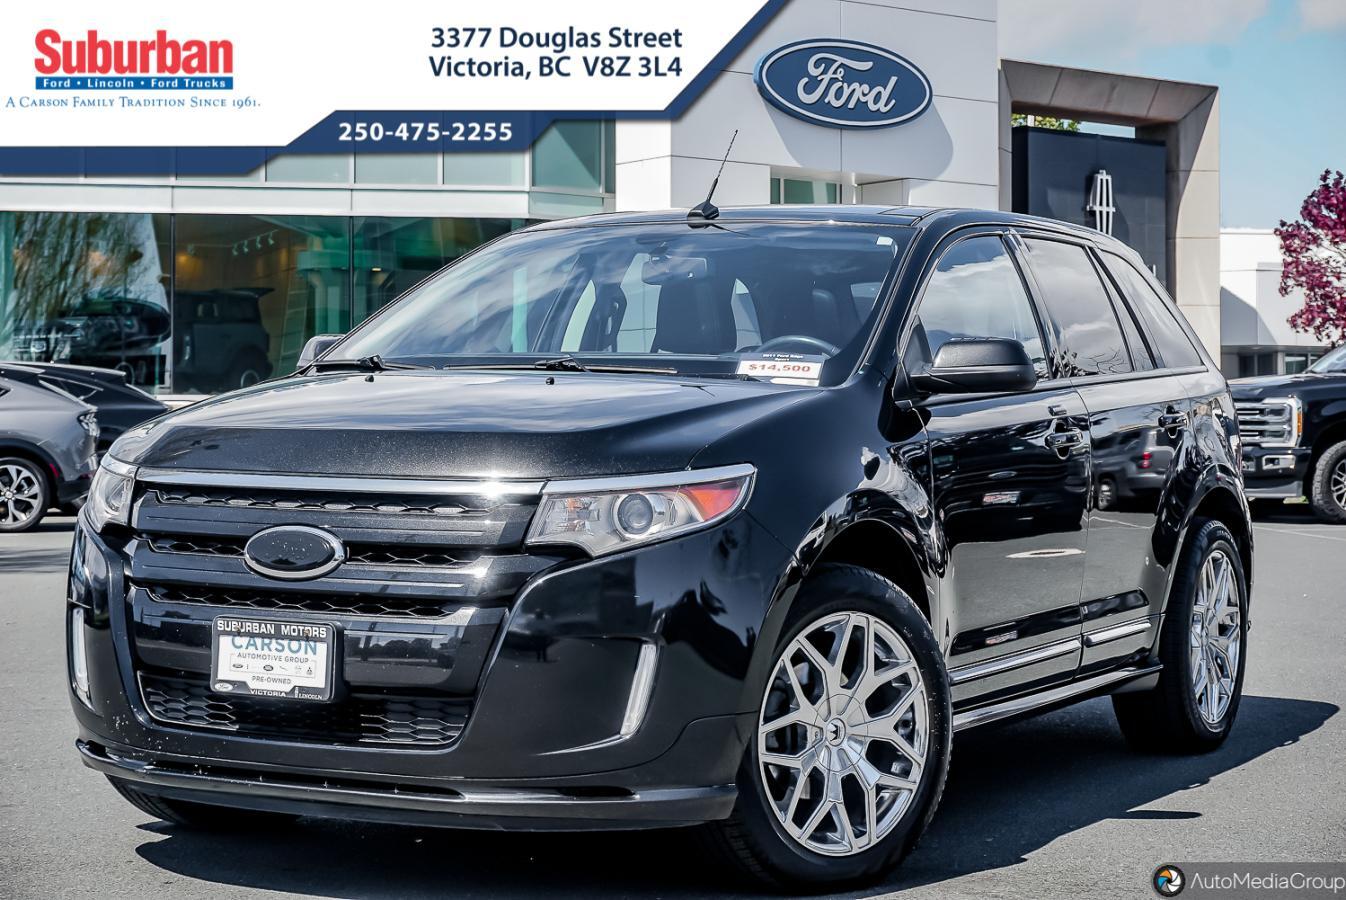 2011 Ford Edge Sport | Panoramic Roof | 22 Wheels | Heated Seats